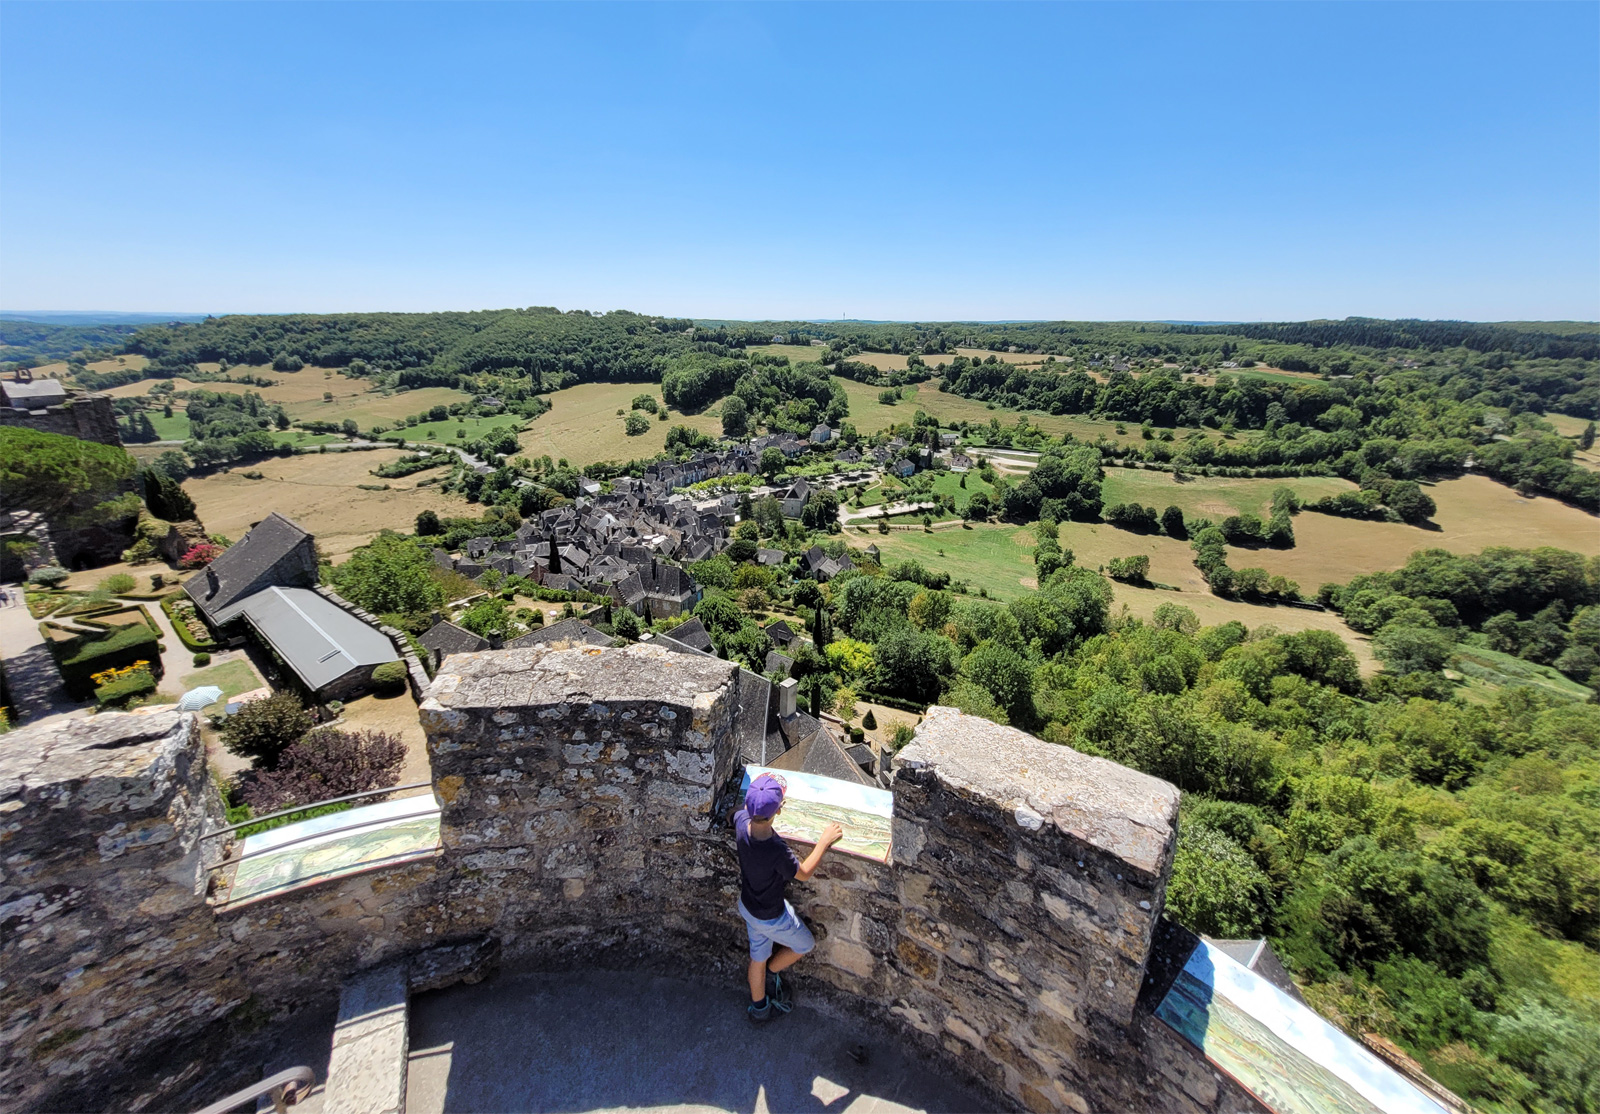 Castles to visit in Corrèze